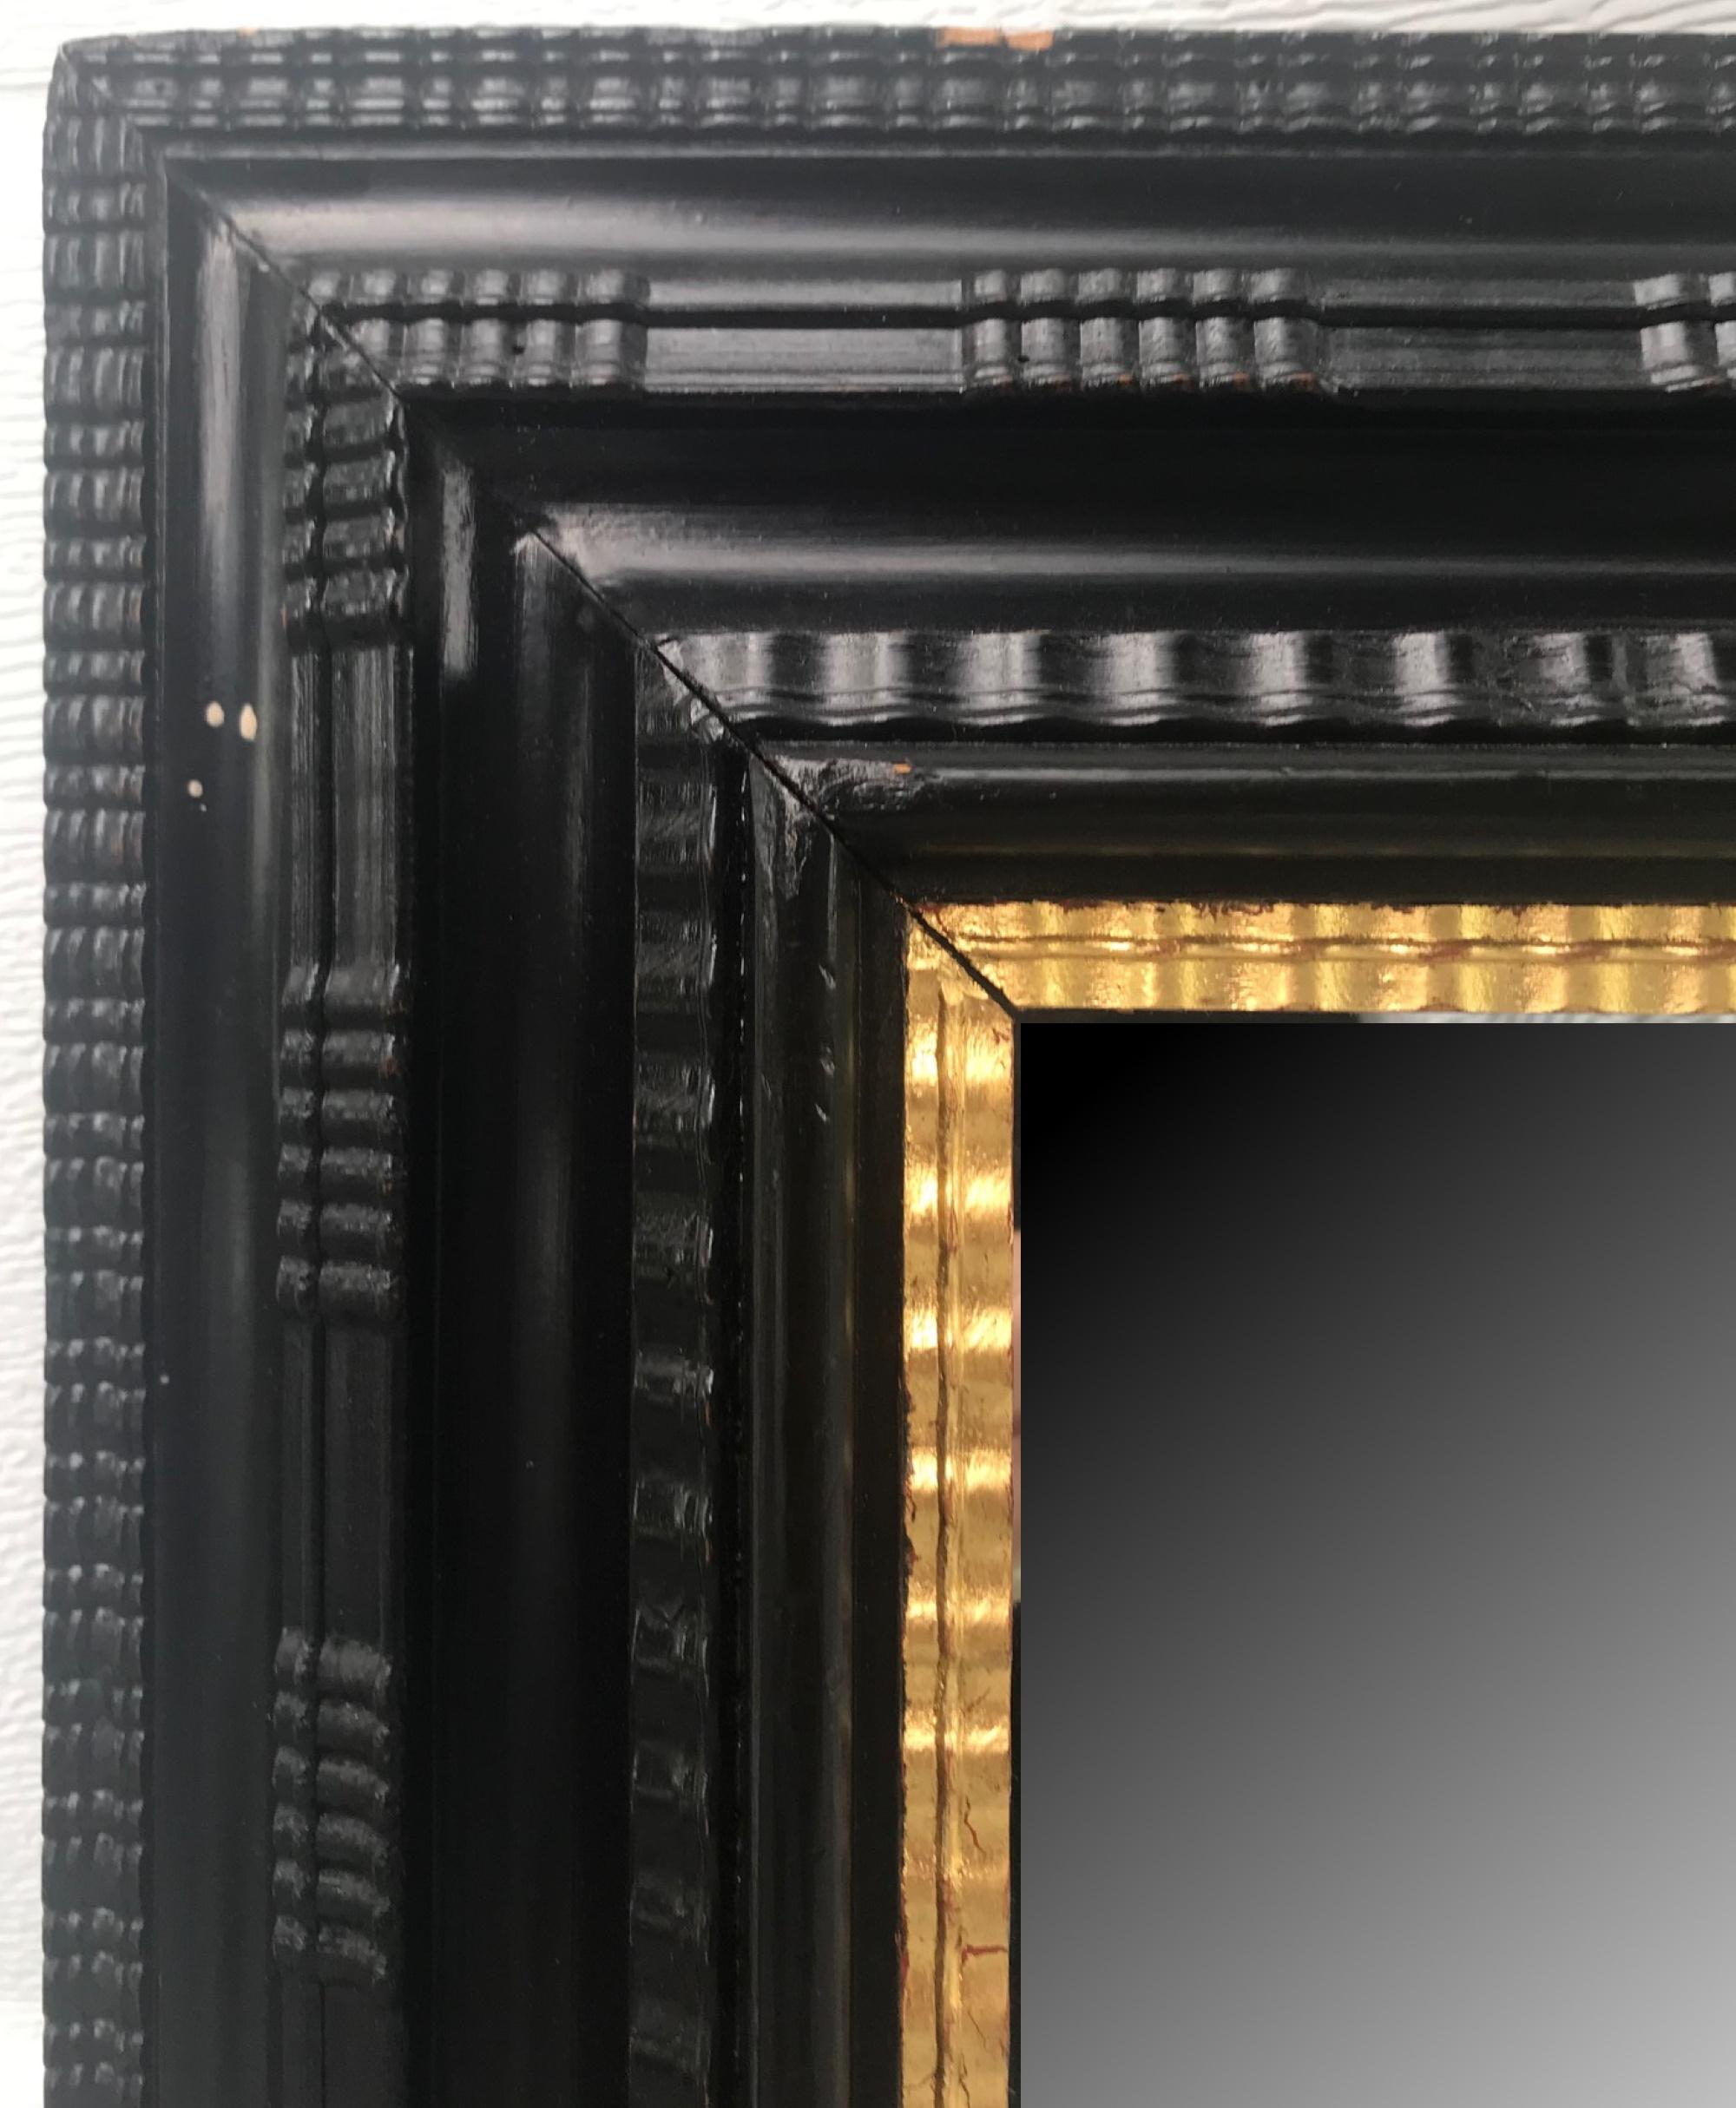 Large Flemish ebonized Ripple frame mirror with gilded liner, circa 1900

This is a Classic Flemish ebonized ripple frame mirror with a gold leaf liner. The depth and detail is exceptional. The molding is highlighted by a ripple panel pattern with